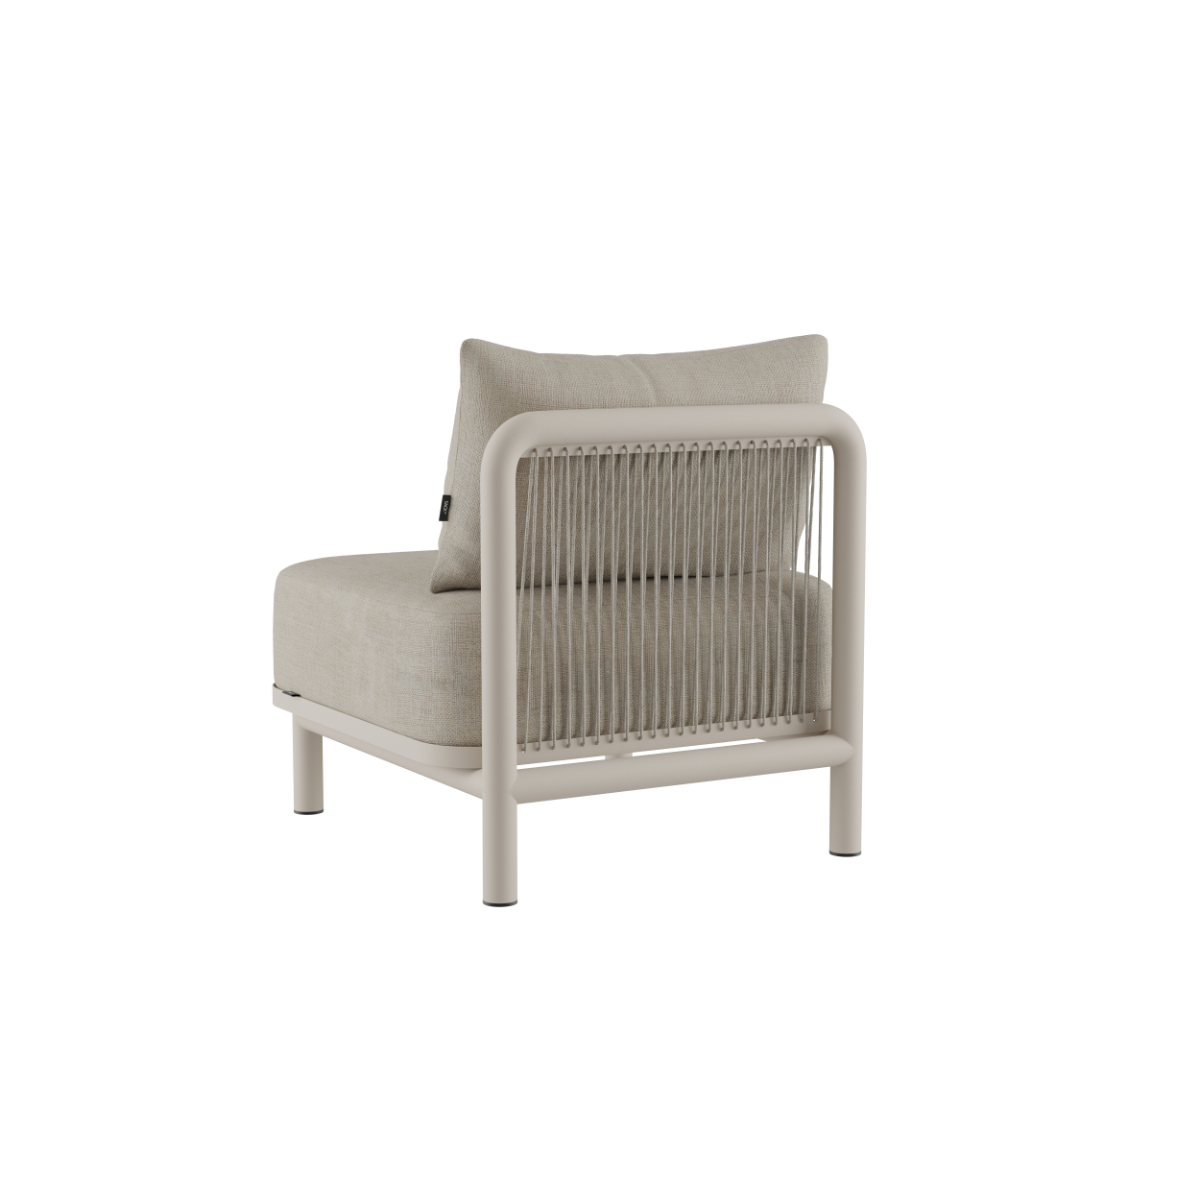 Kirra Lounge Sofa - Seat section [Contract]